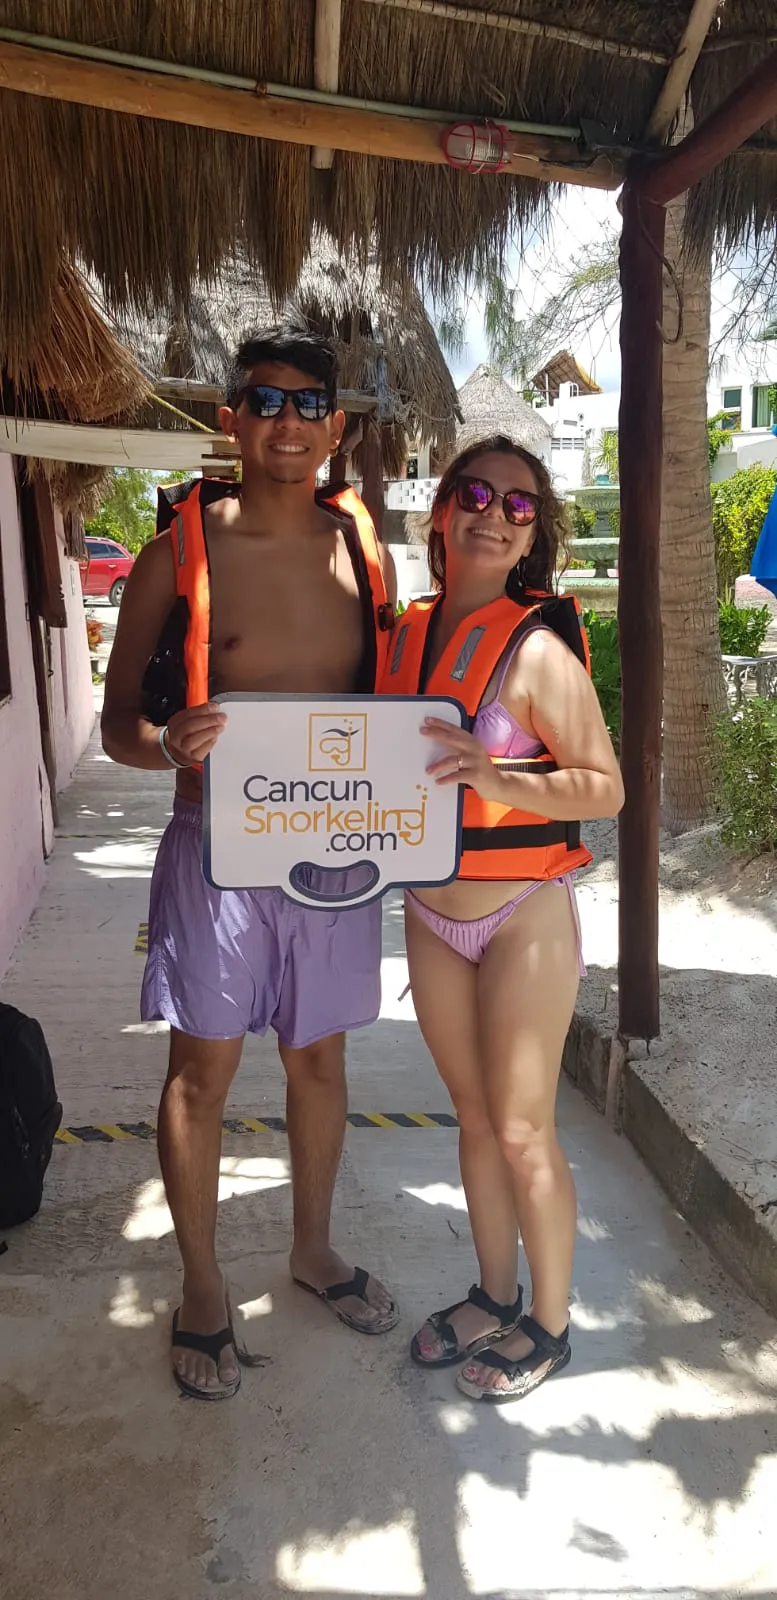 Young couple on swimsuits wearing life jackets and sunglasses holding a sign with the Cancun Snorkeling logo